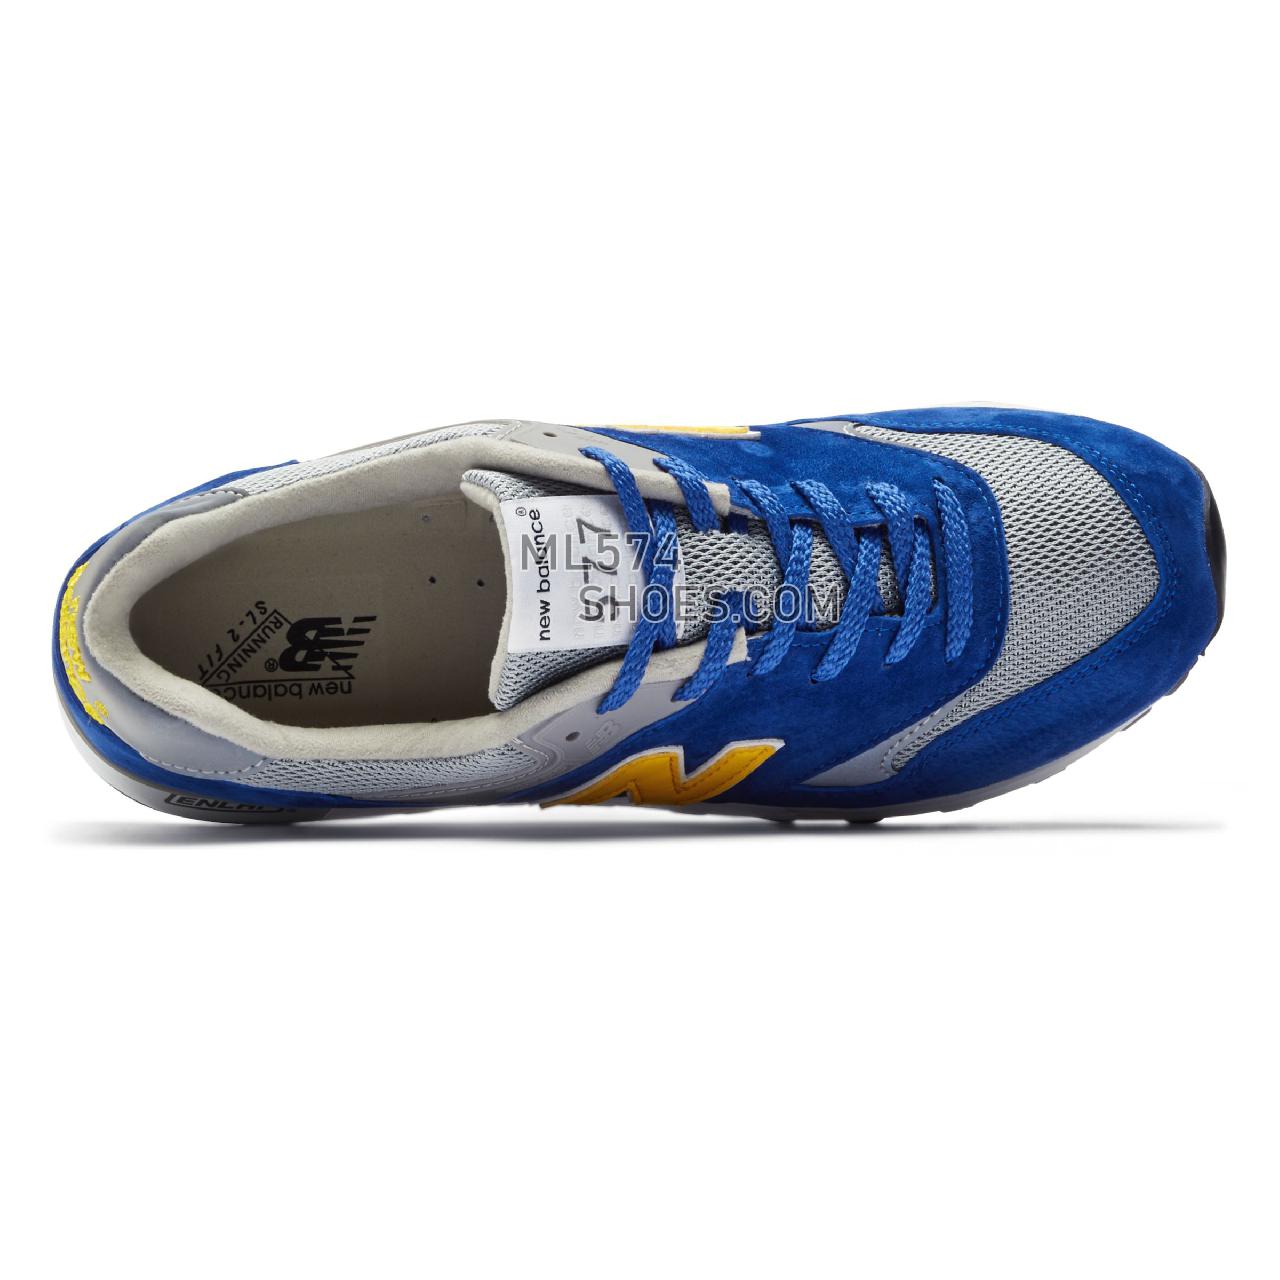 New Balance MADE in UK 577 - Men's Made in USA And UK Sneakers - Blue with Yellow and Grey - M577BYG